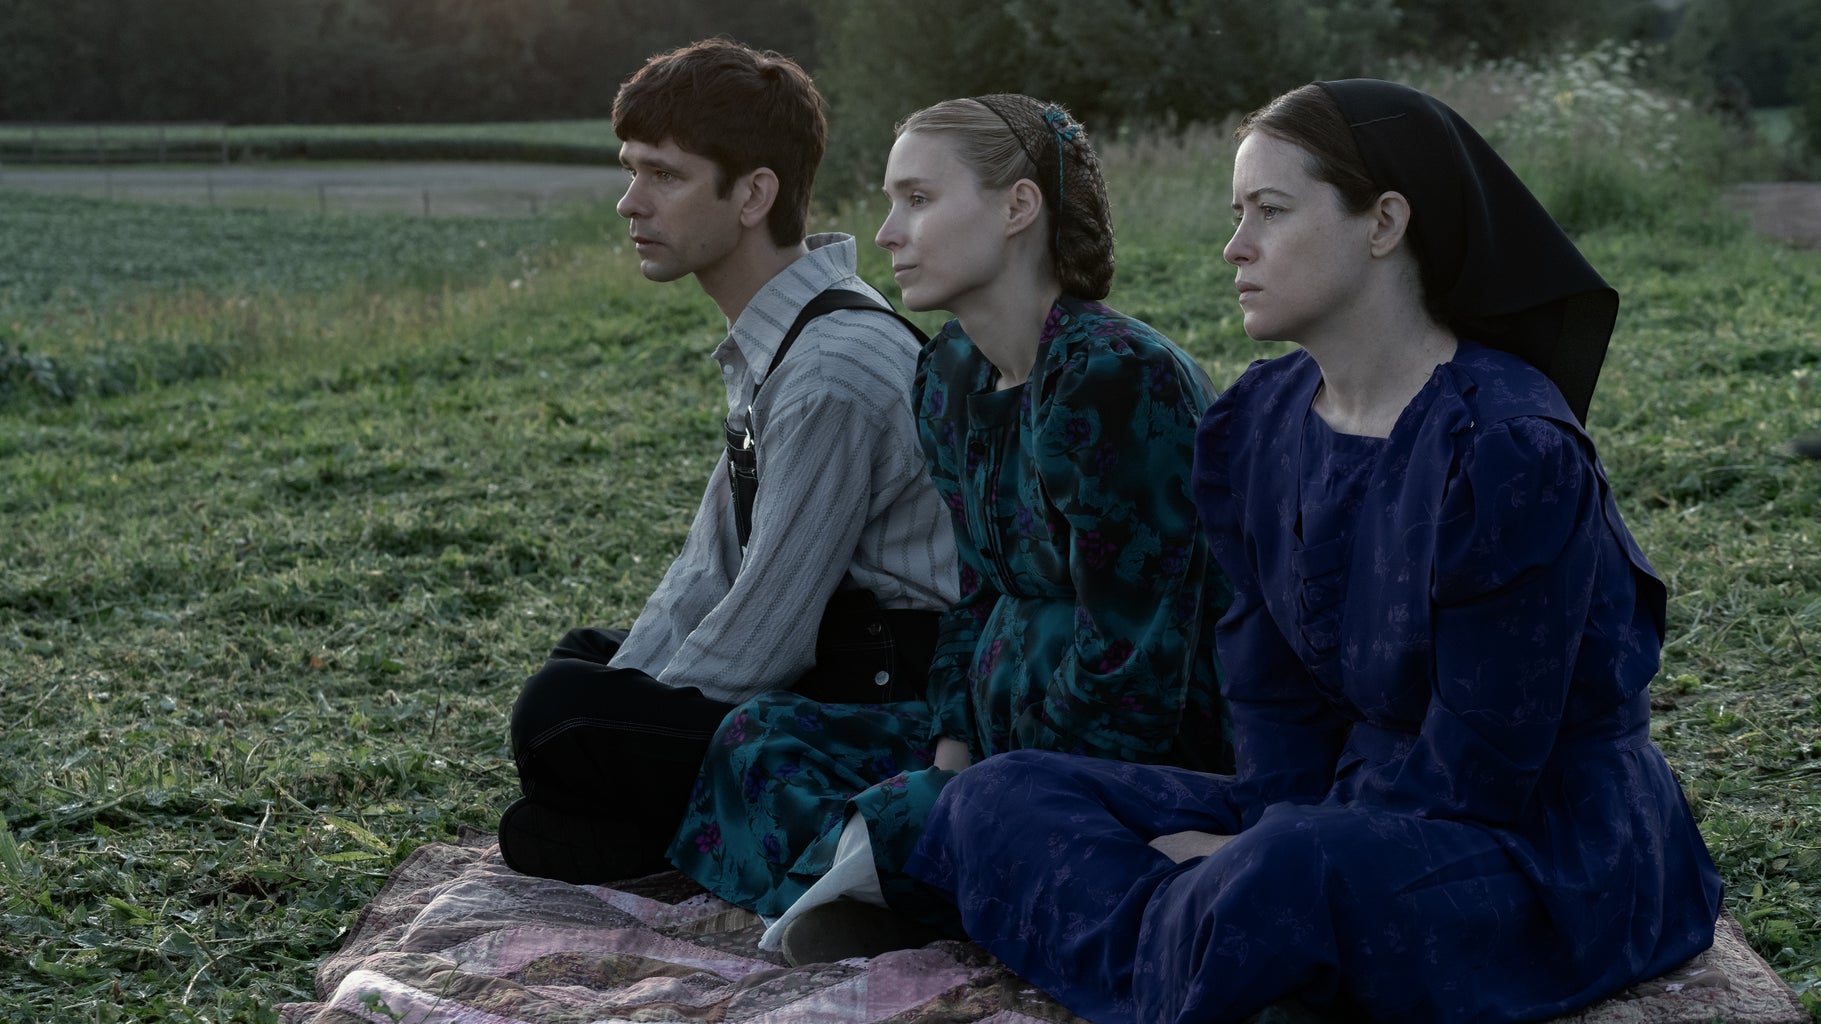 two women and one man in modest clothing sitting on a picnic blanket